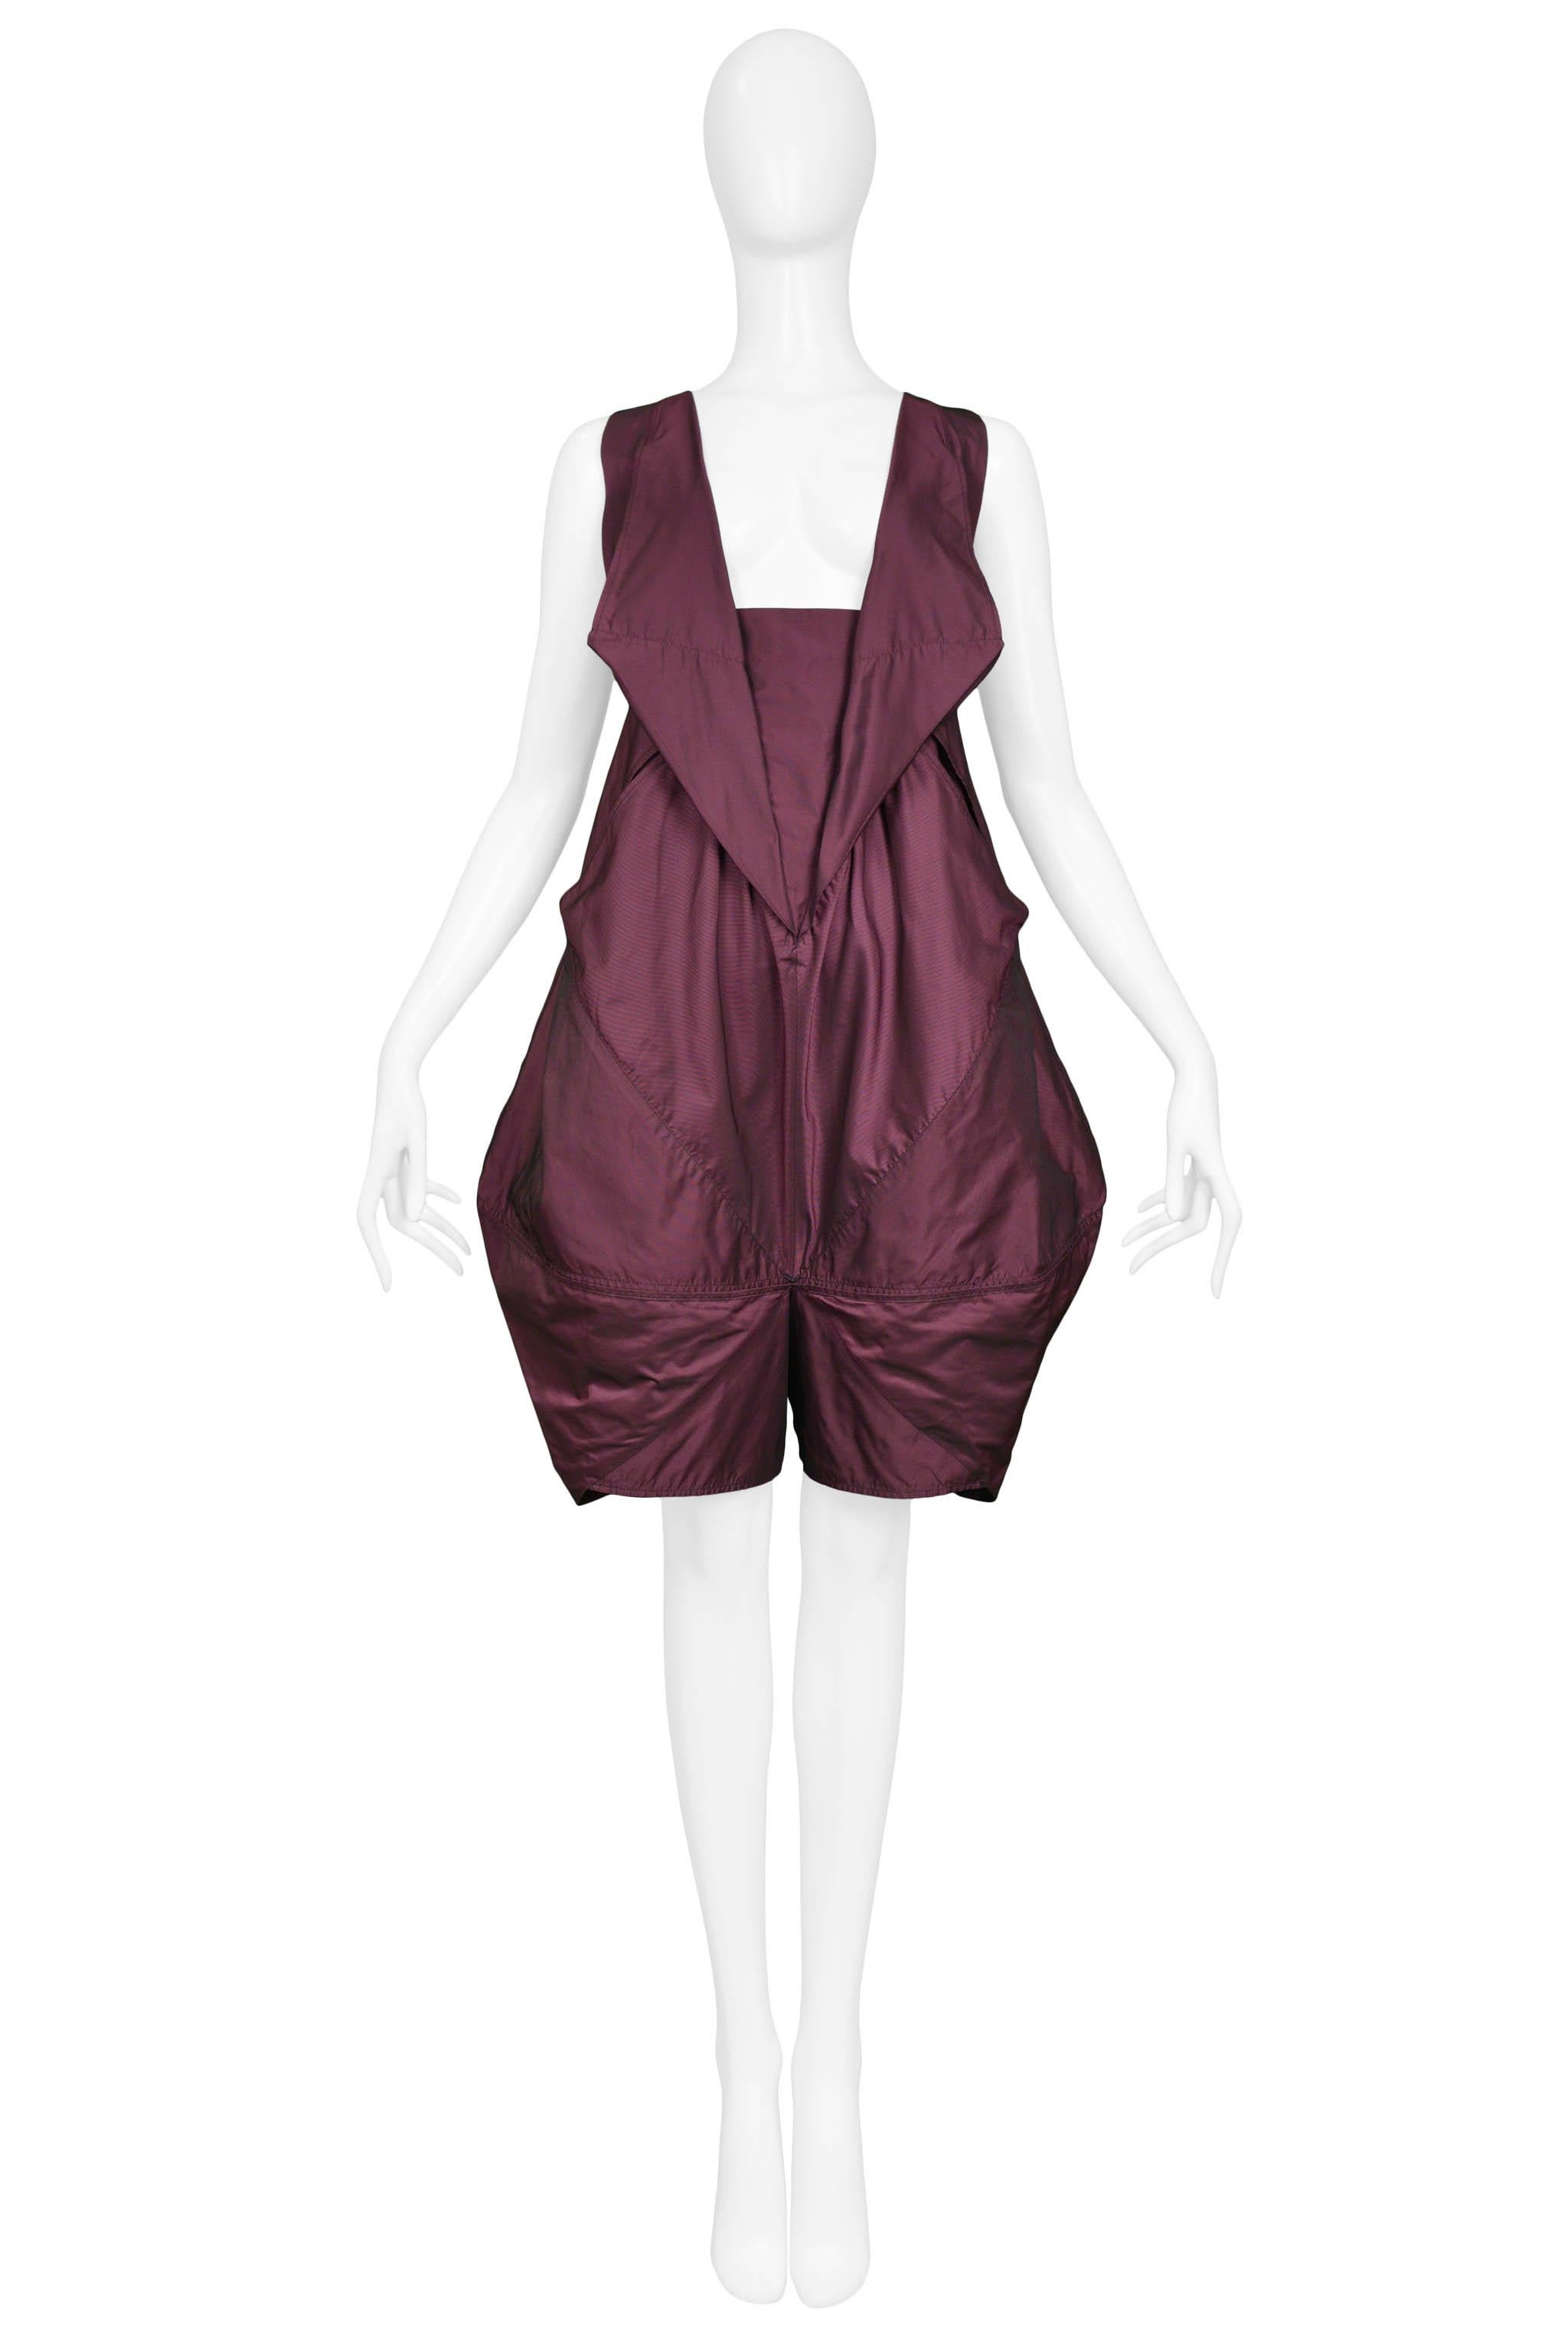 Resurrection Vintage is excited to offer a vintage Issey Miyake purple balloon romper featuring folding front, back, and side panels, wide straps, overall style body, and short legs. 

Issey Miyake
Size S/M
Measurements: Bust 40